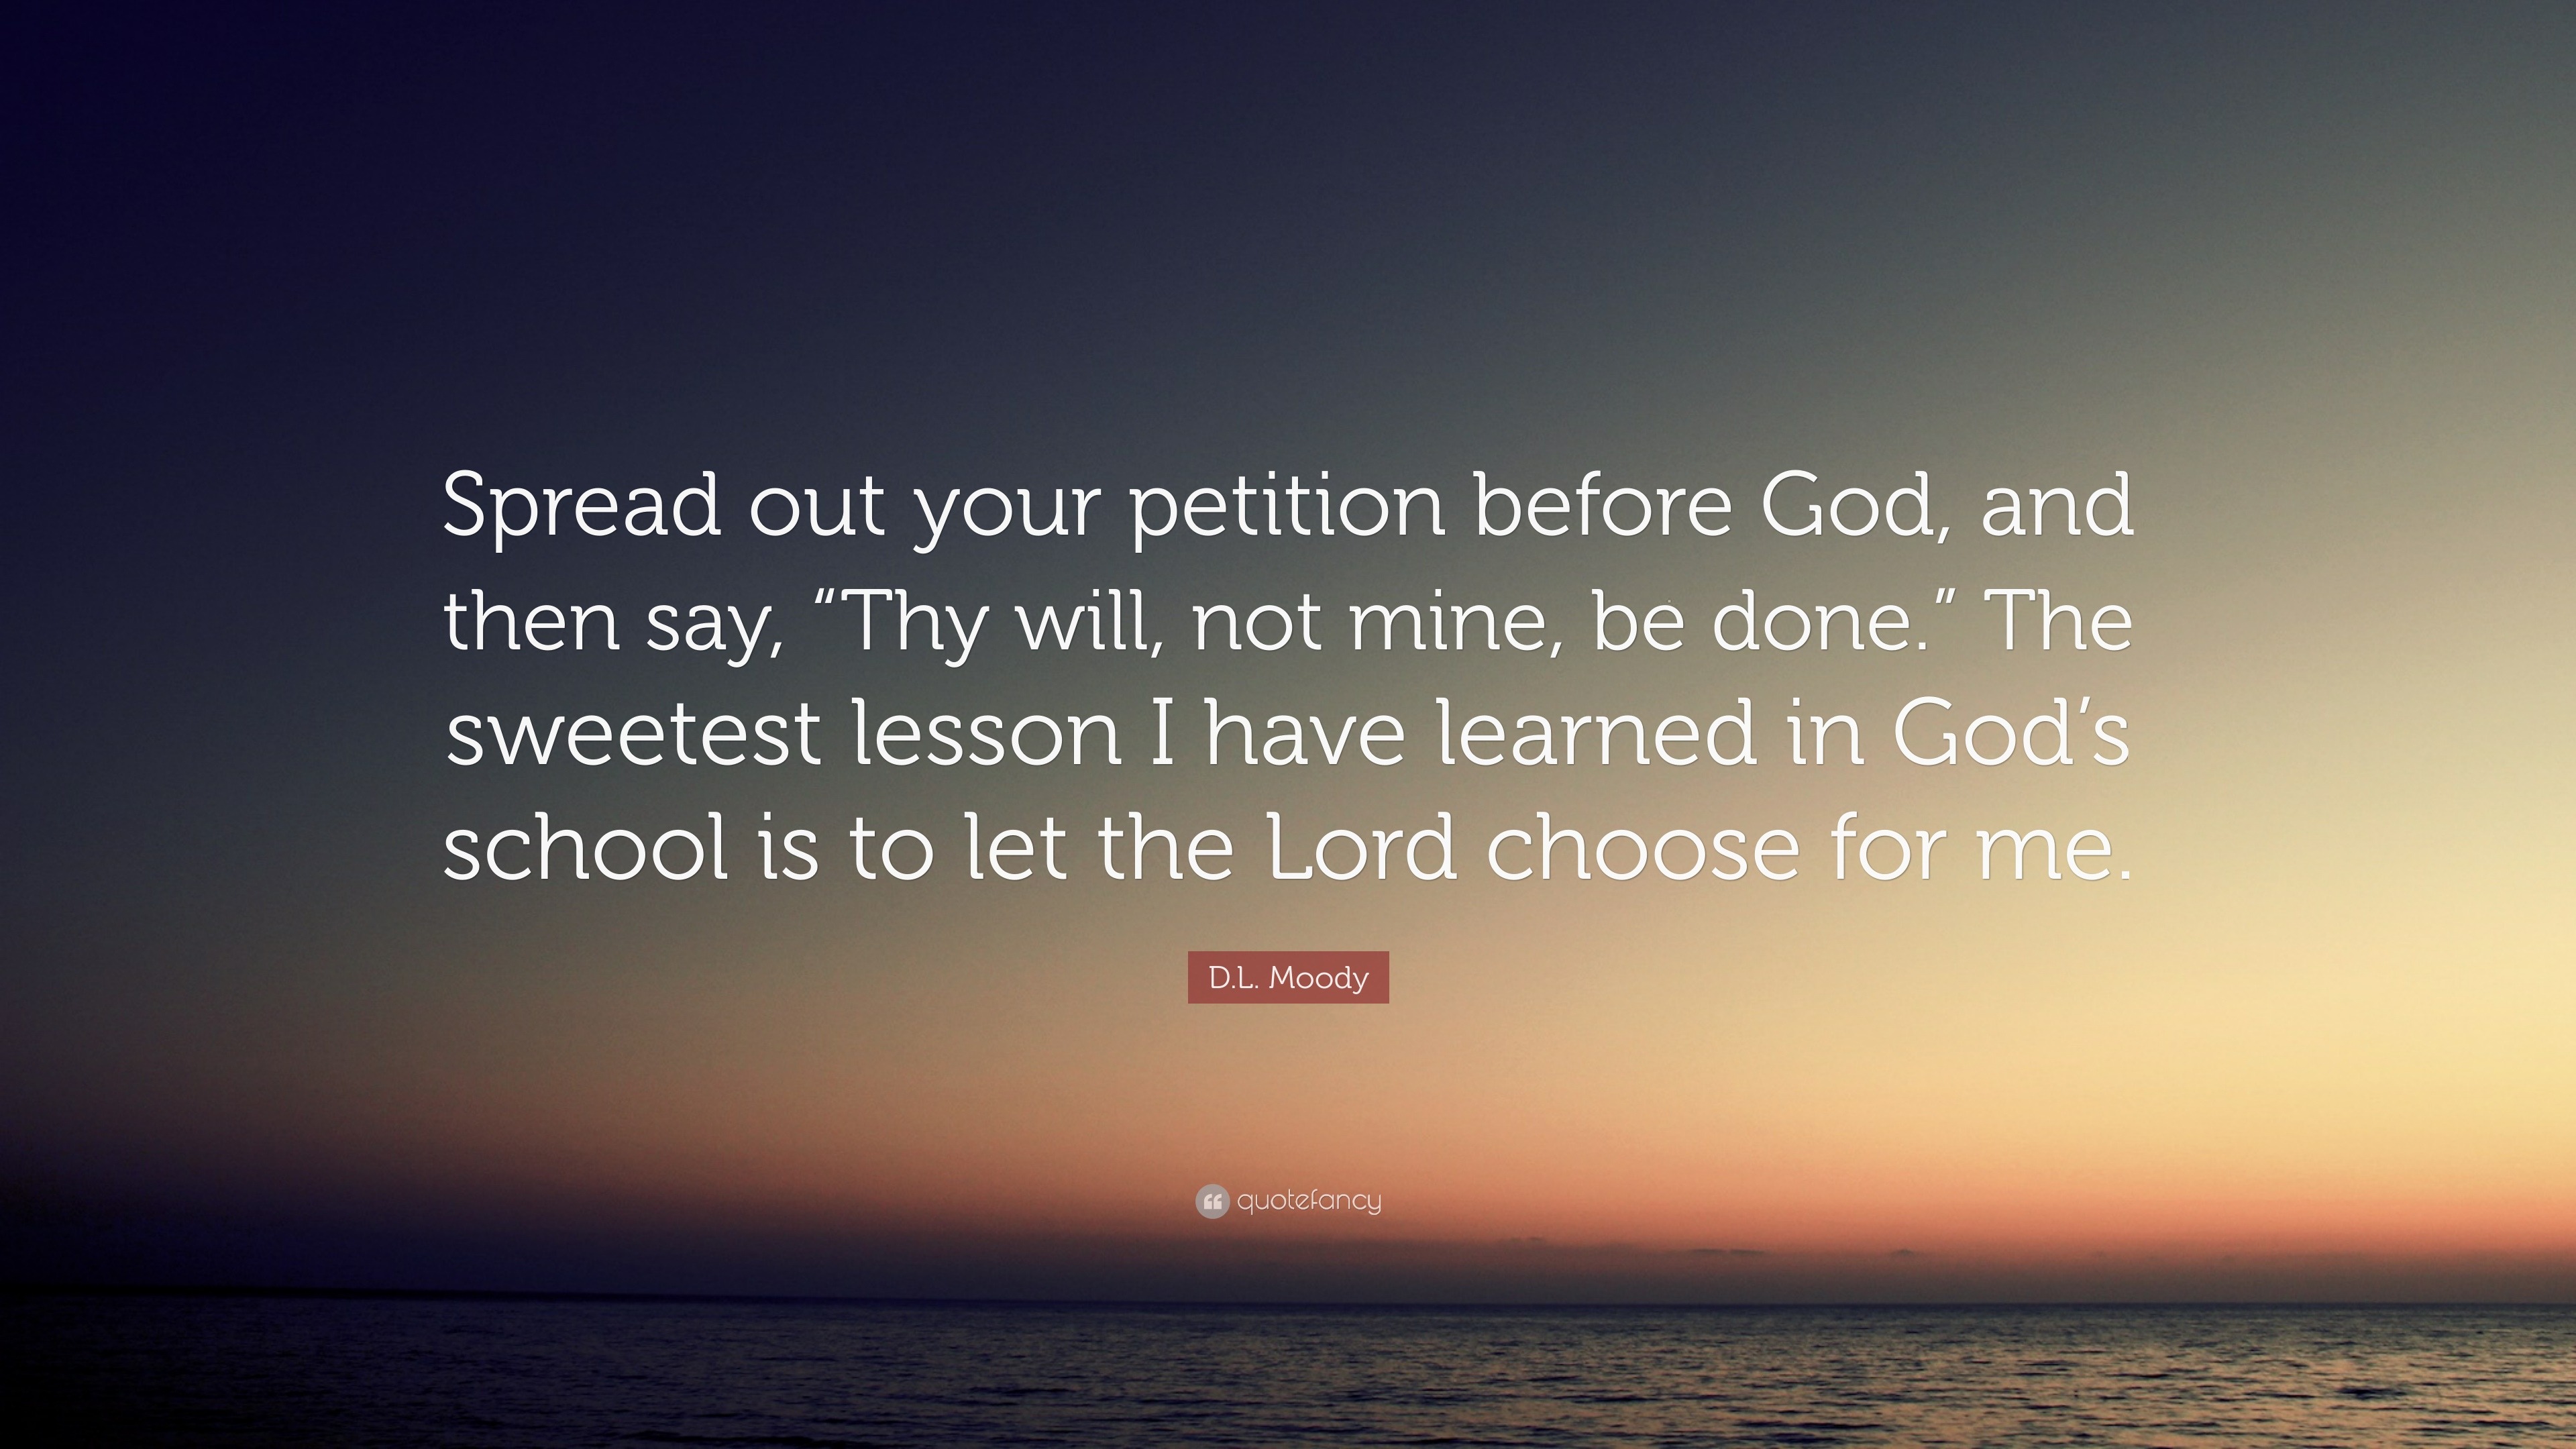 https://quotefancy.com/media/wallpaper/3840x2160/1858245-D-L-Moody-Quote-Spread-out-your-petition-before-God-and-then-say.jpg